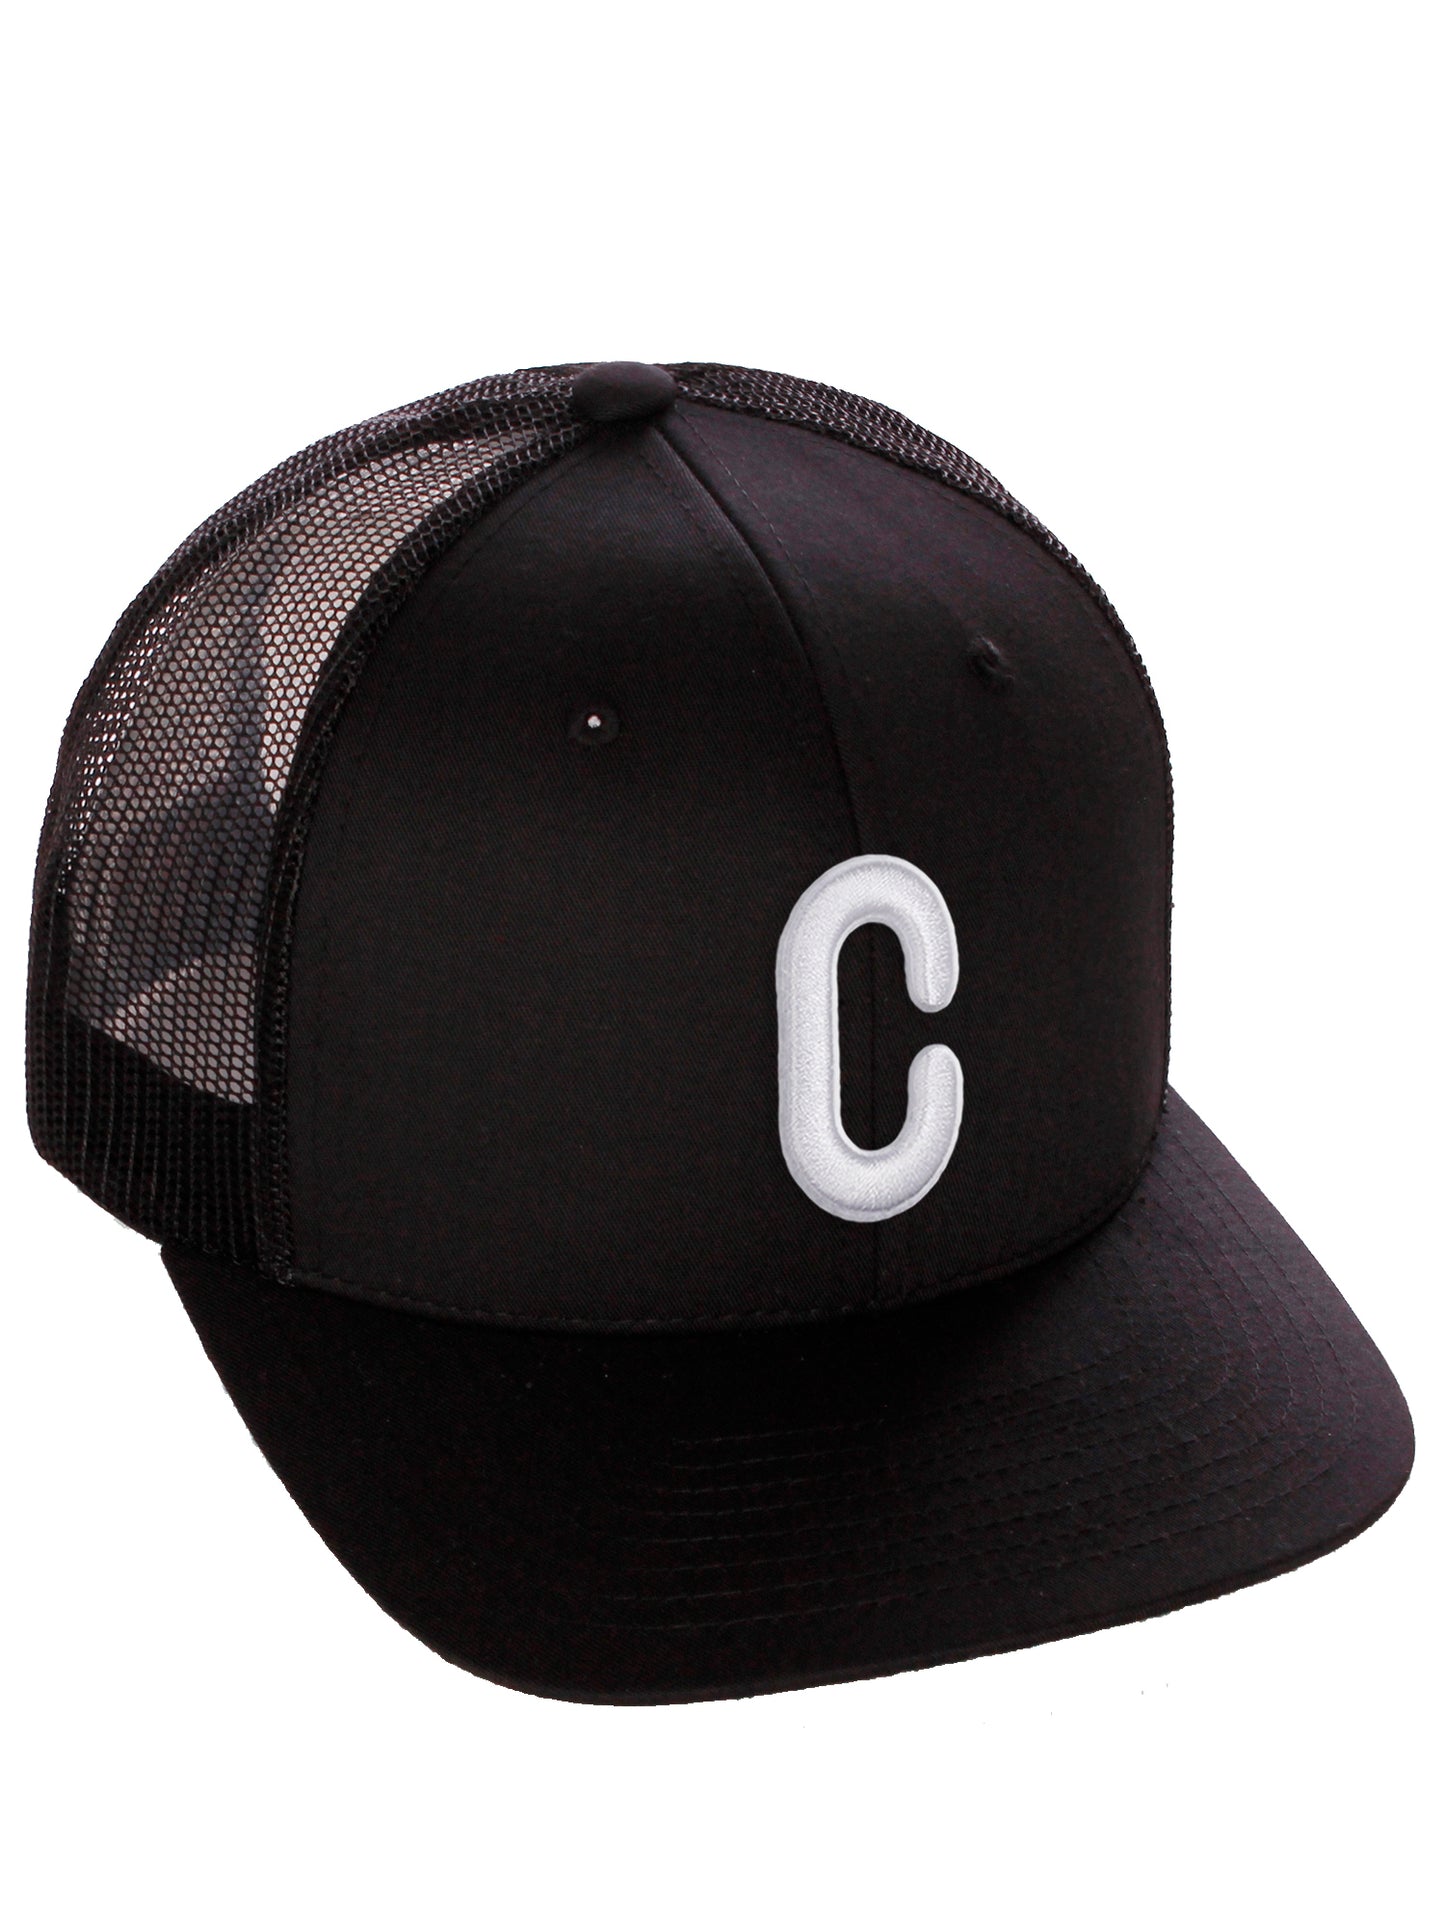 Daxton Classic Baseball Trucker Hat Embroidered A to Z Letters Structured Mid Profile Cap